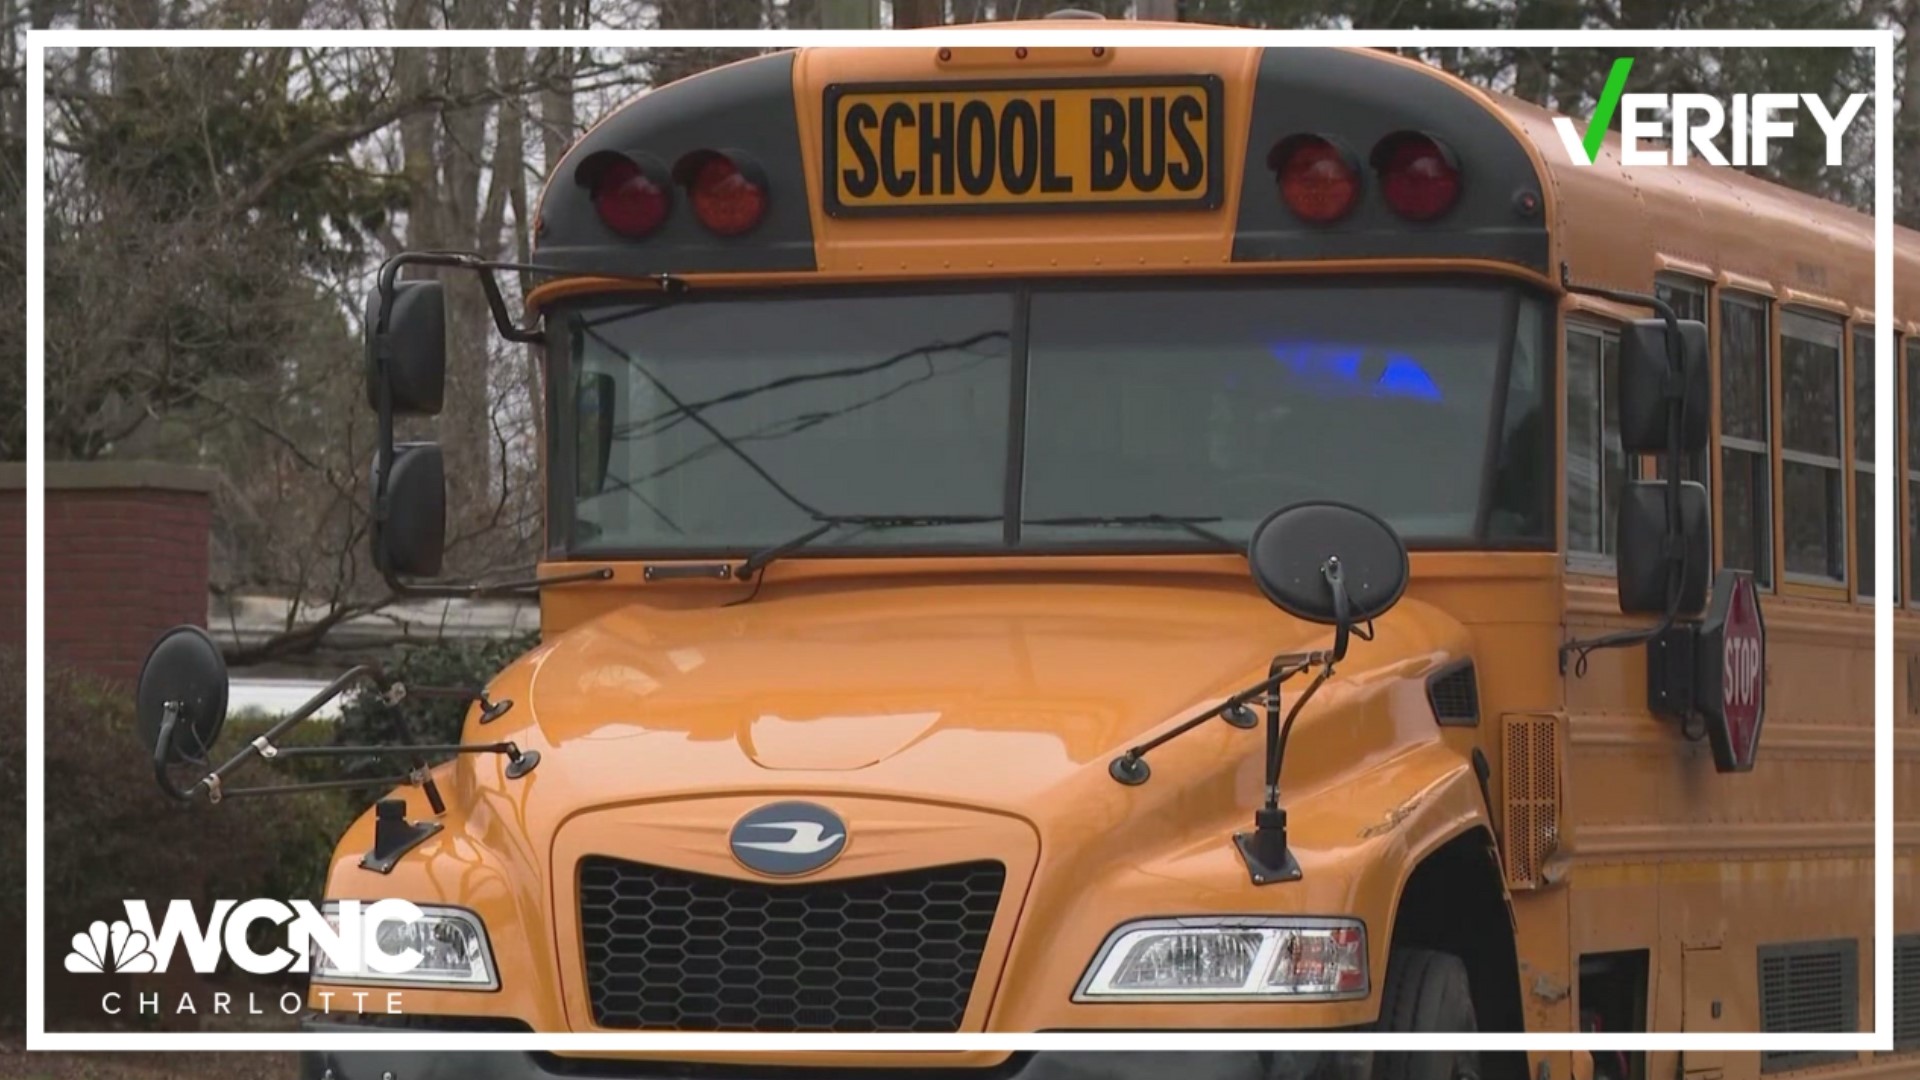 When it comes to accidents involving school bus drivers, they are covered under the North Carolina State Tort Claims Act.